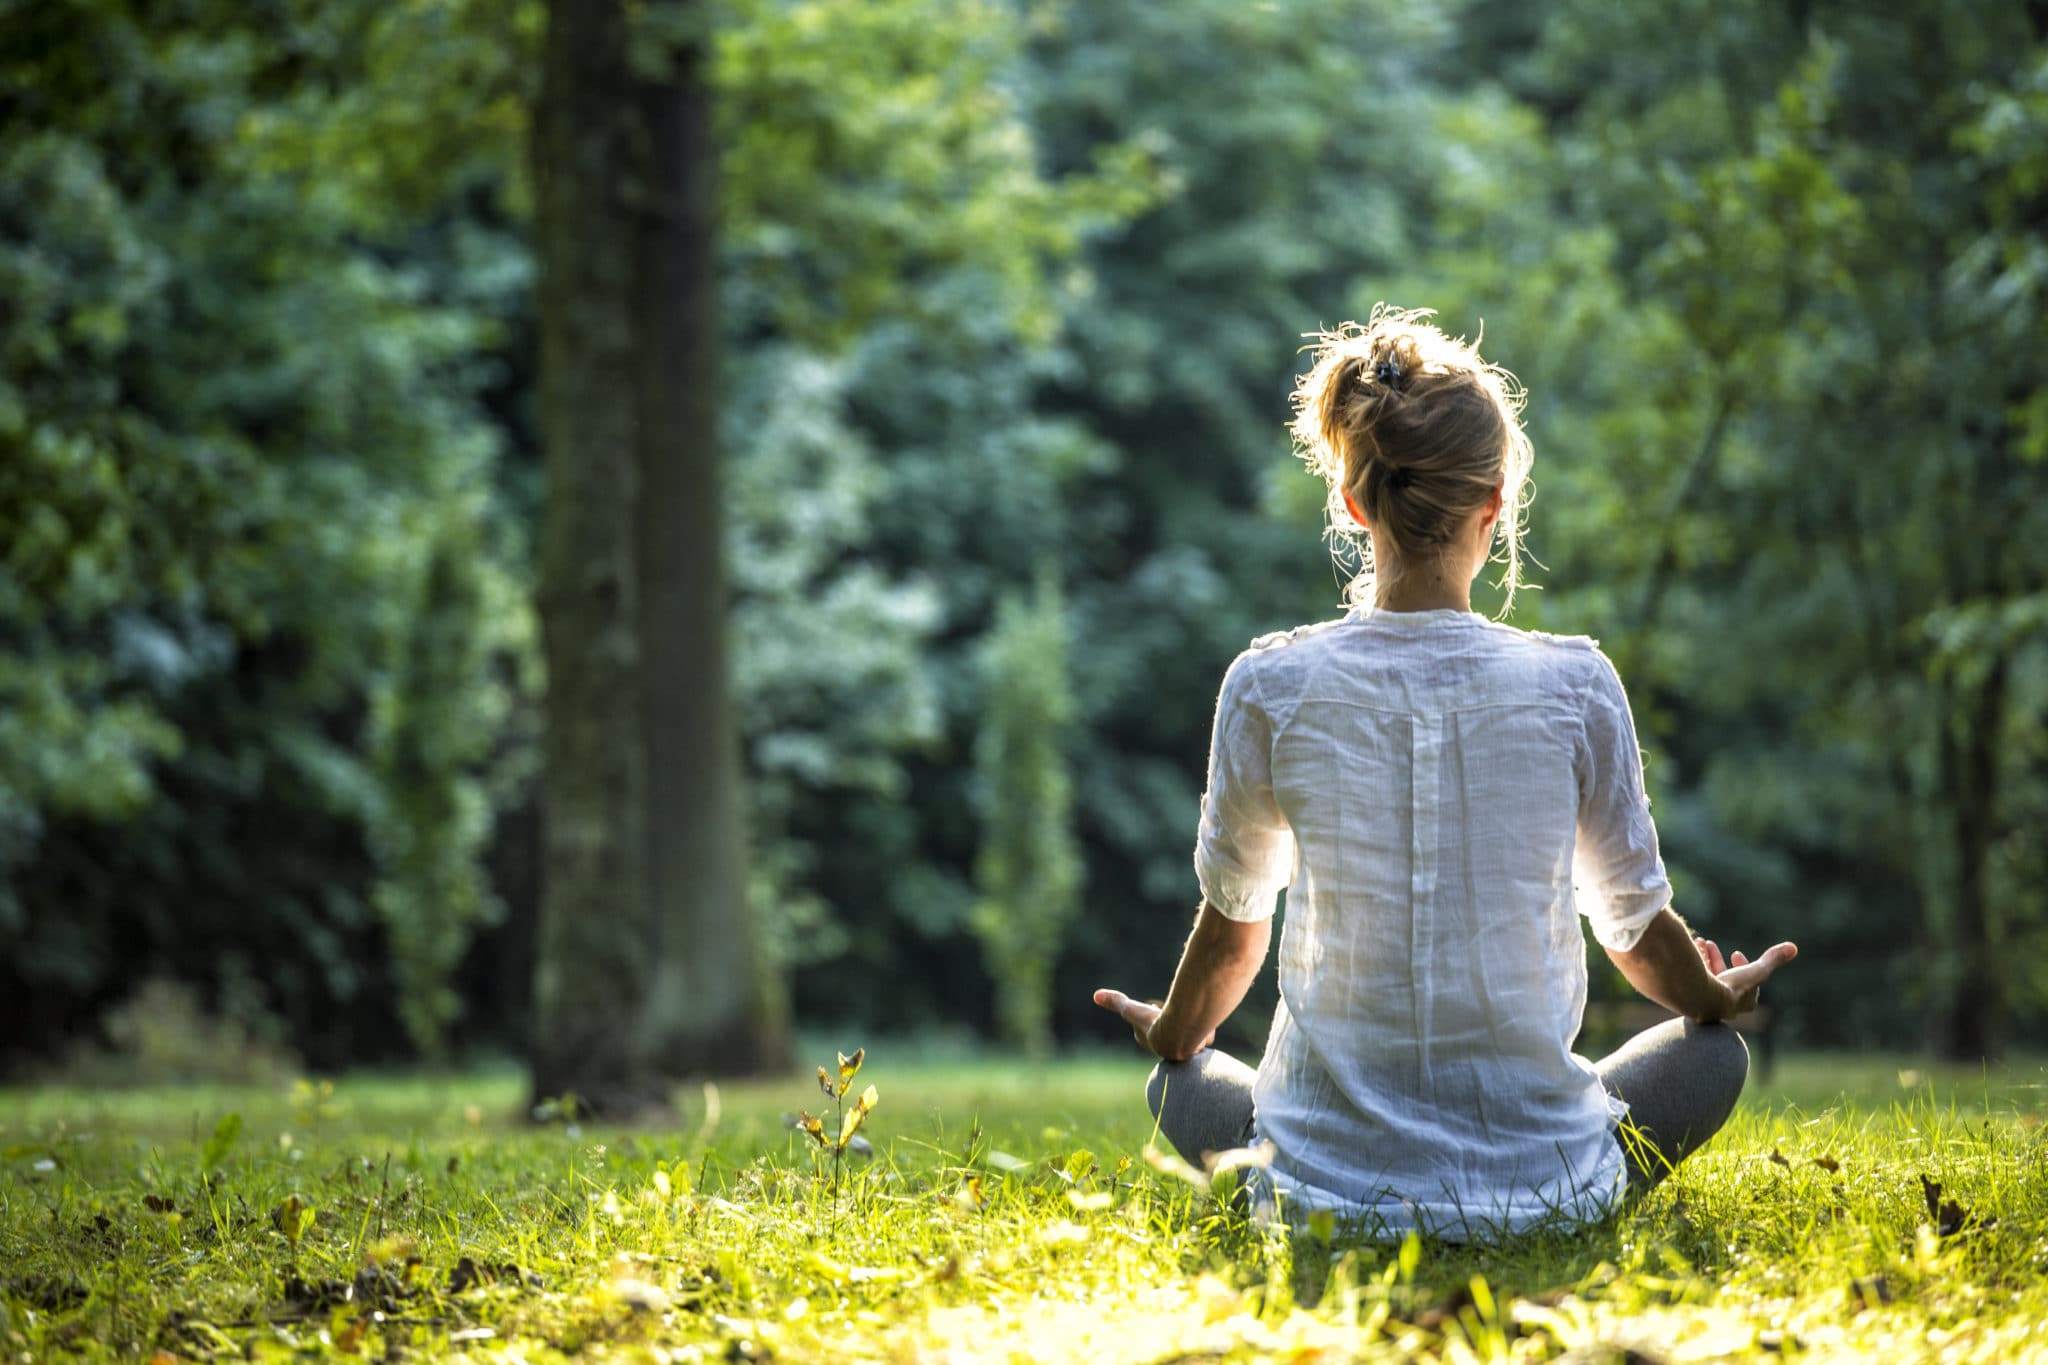 What Are the Benefits of Mindfulness Meditation?